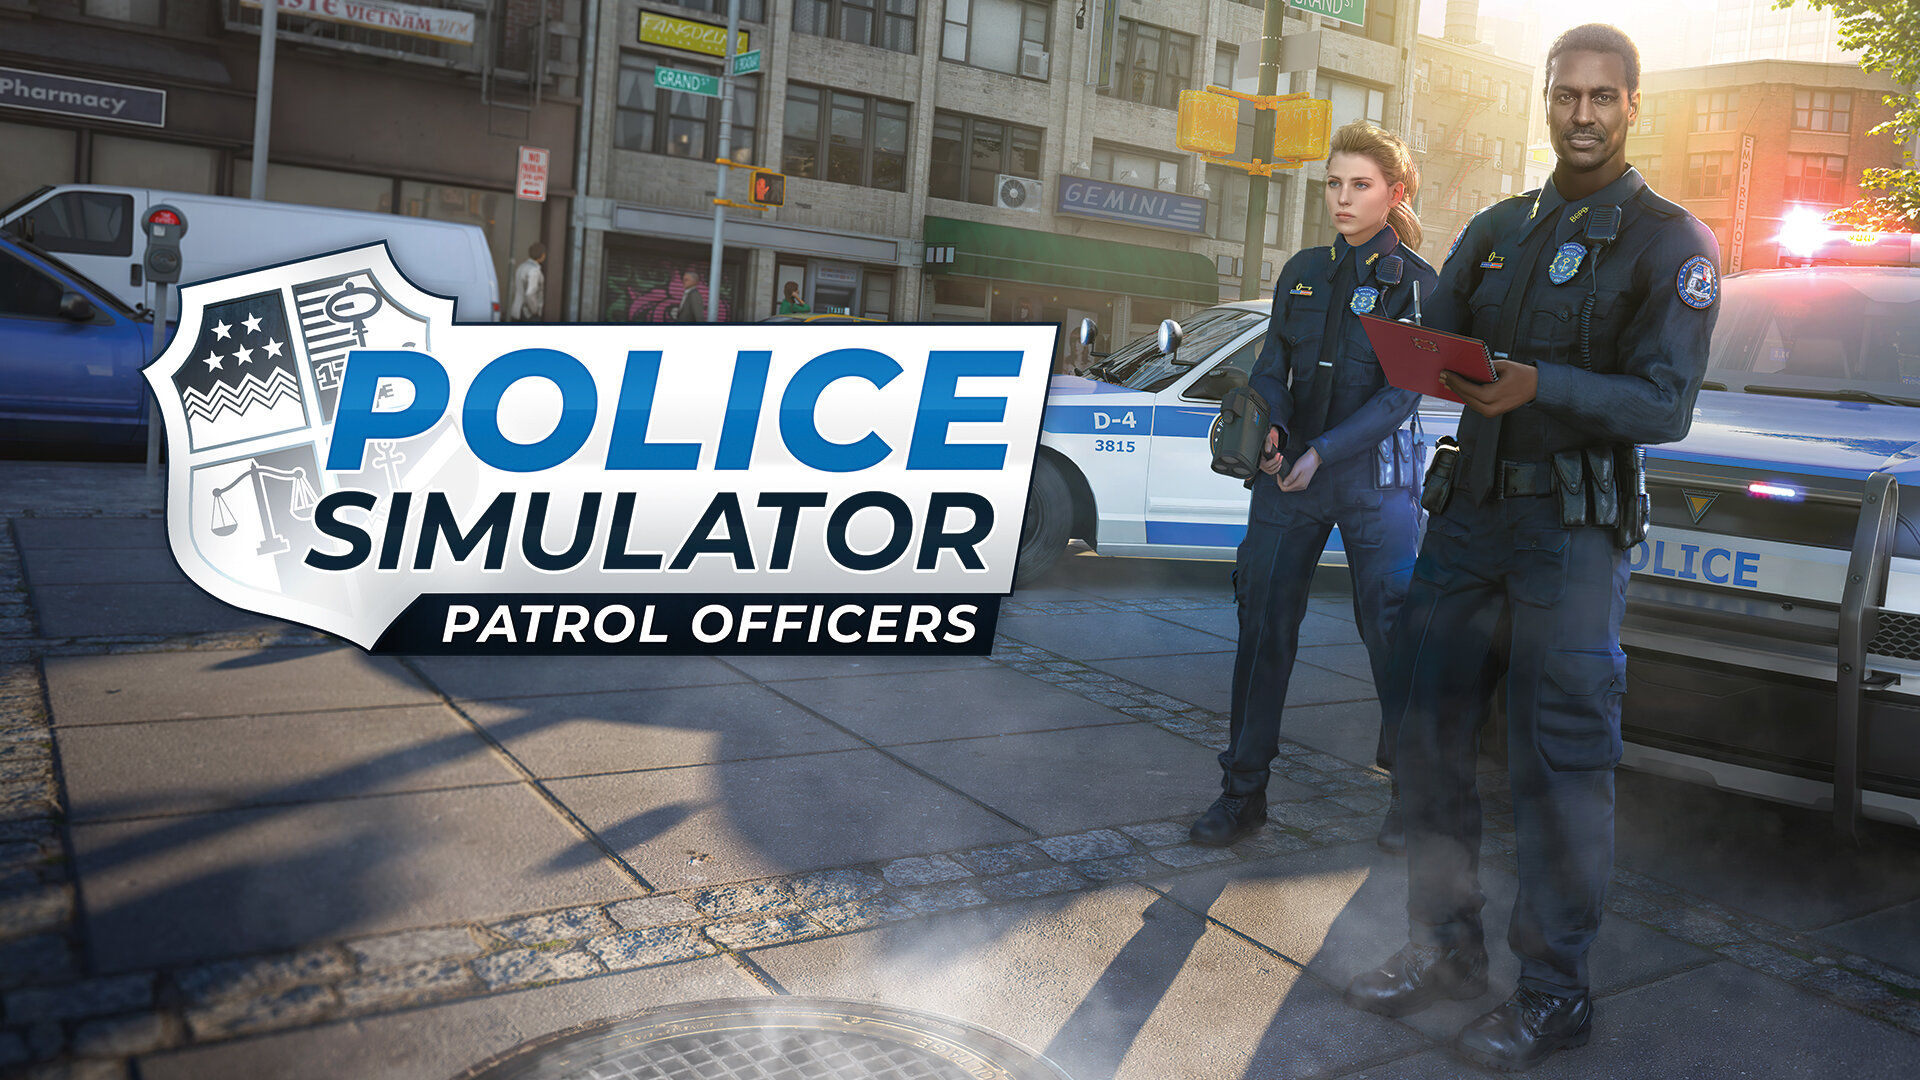 Police Simulator: Patrol Officers Xbox PSN pre-order available now